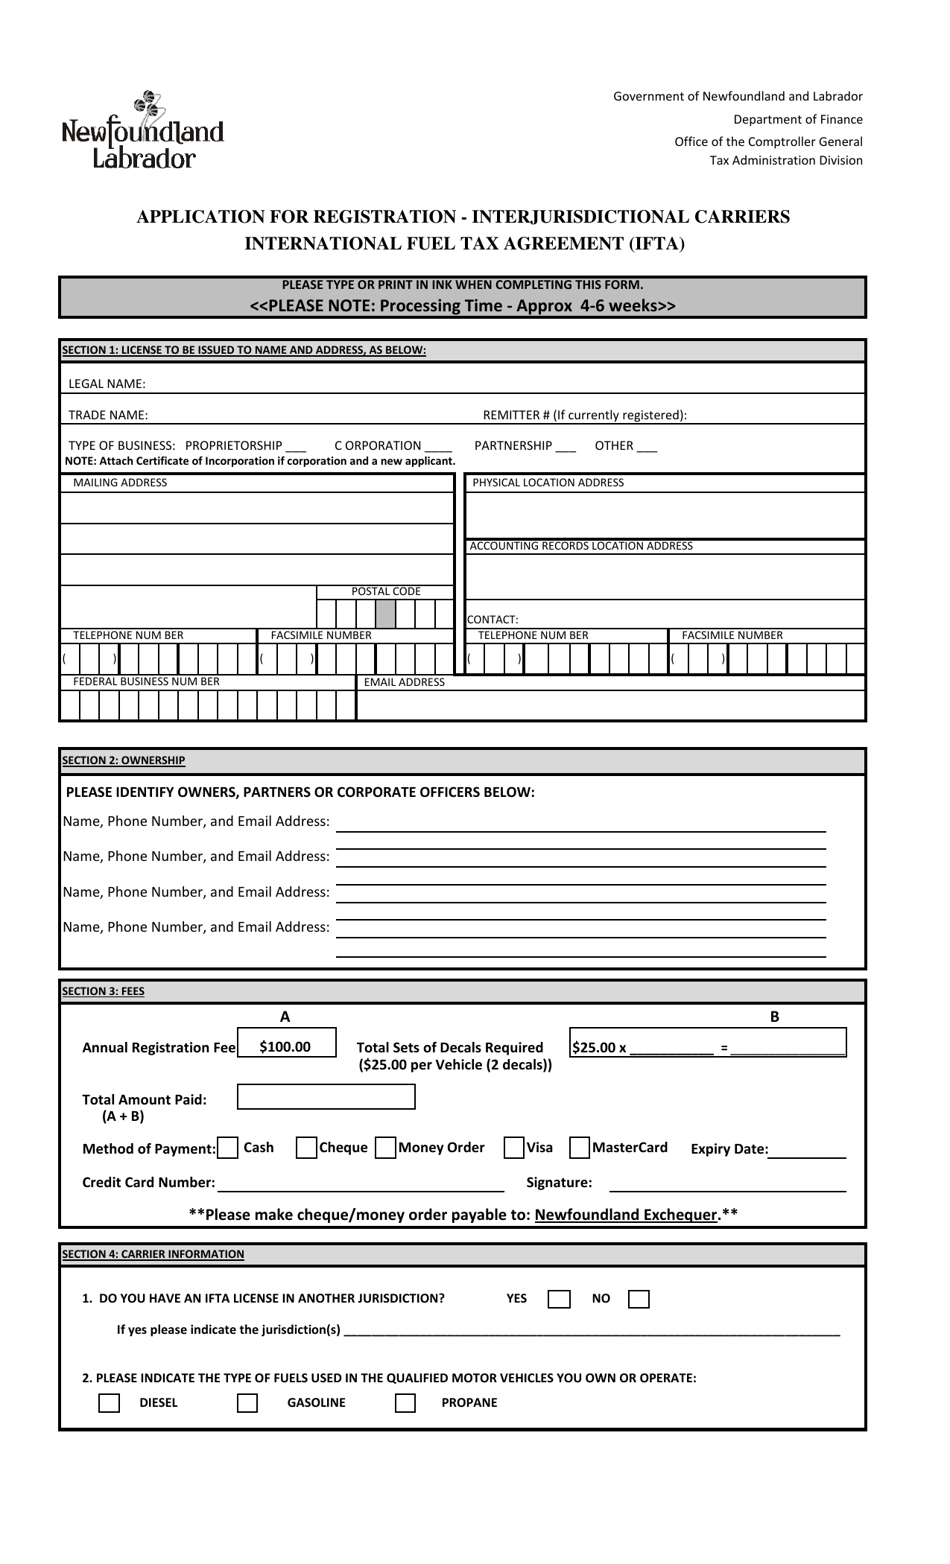 Application for Registration - Interjurisdictional Carriers International Fuel Tax Agreement (Ifta) - Newfoundland and Labrador, Canada, Page 1